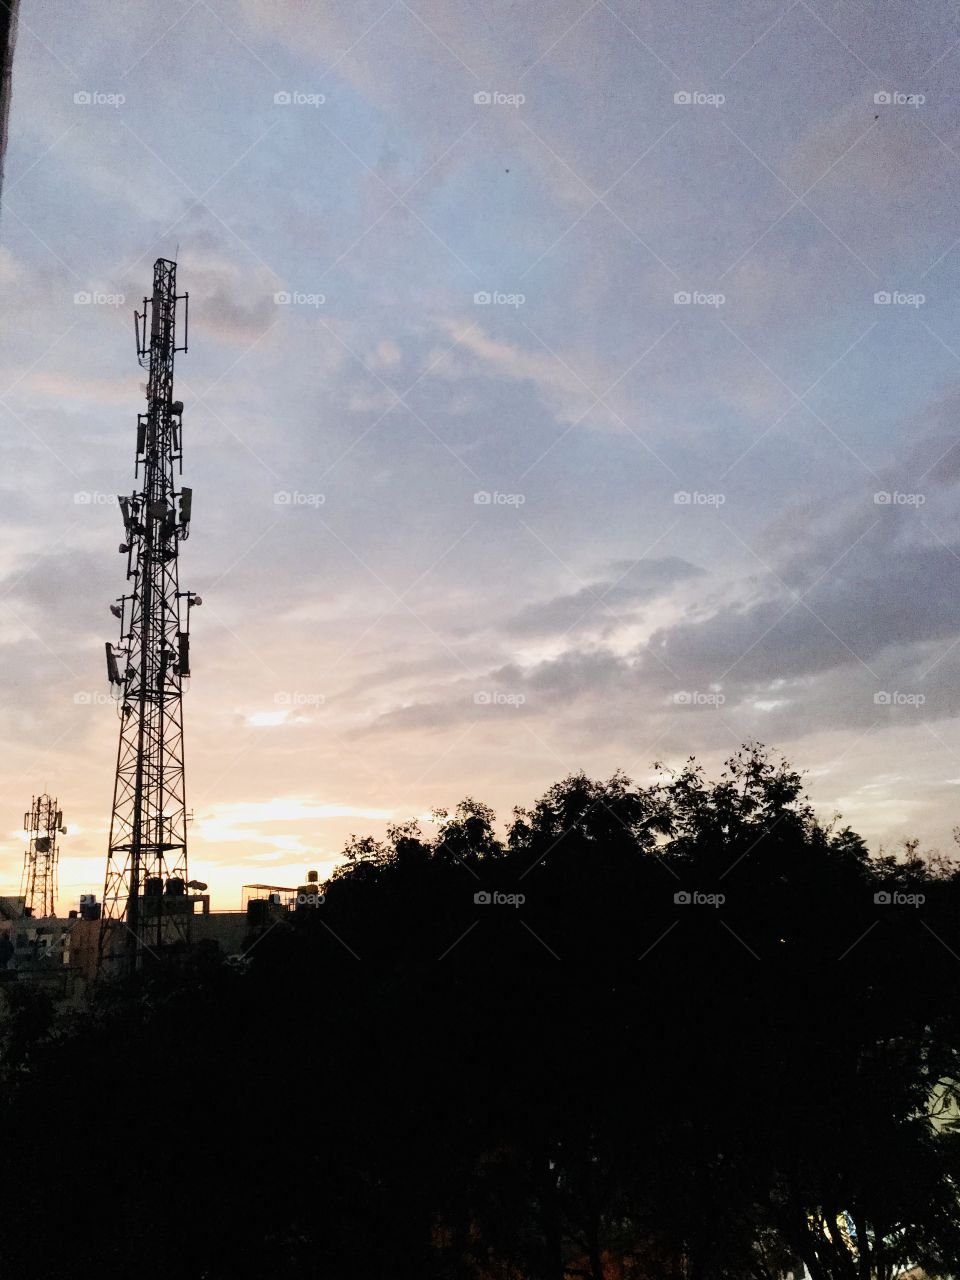 Click of a simple tower nearby my house on a beautiful evening.